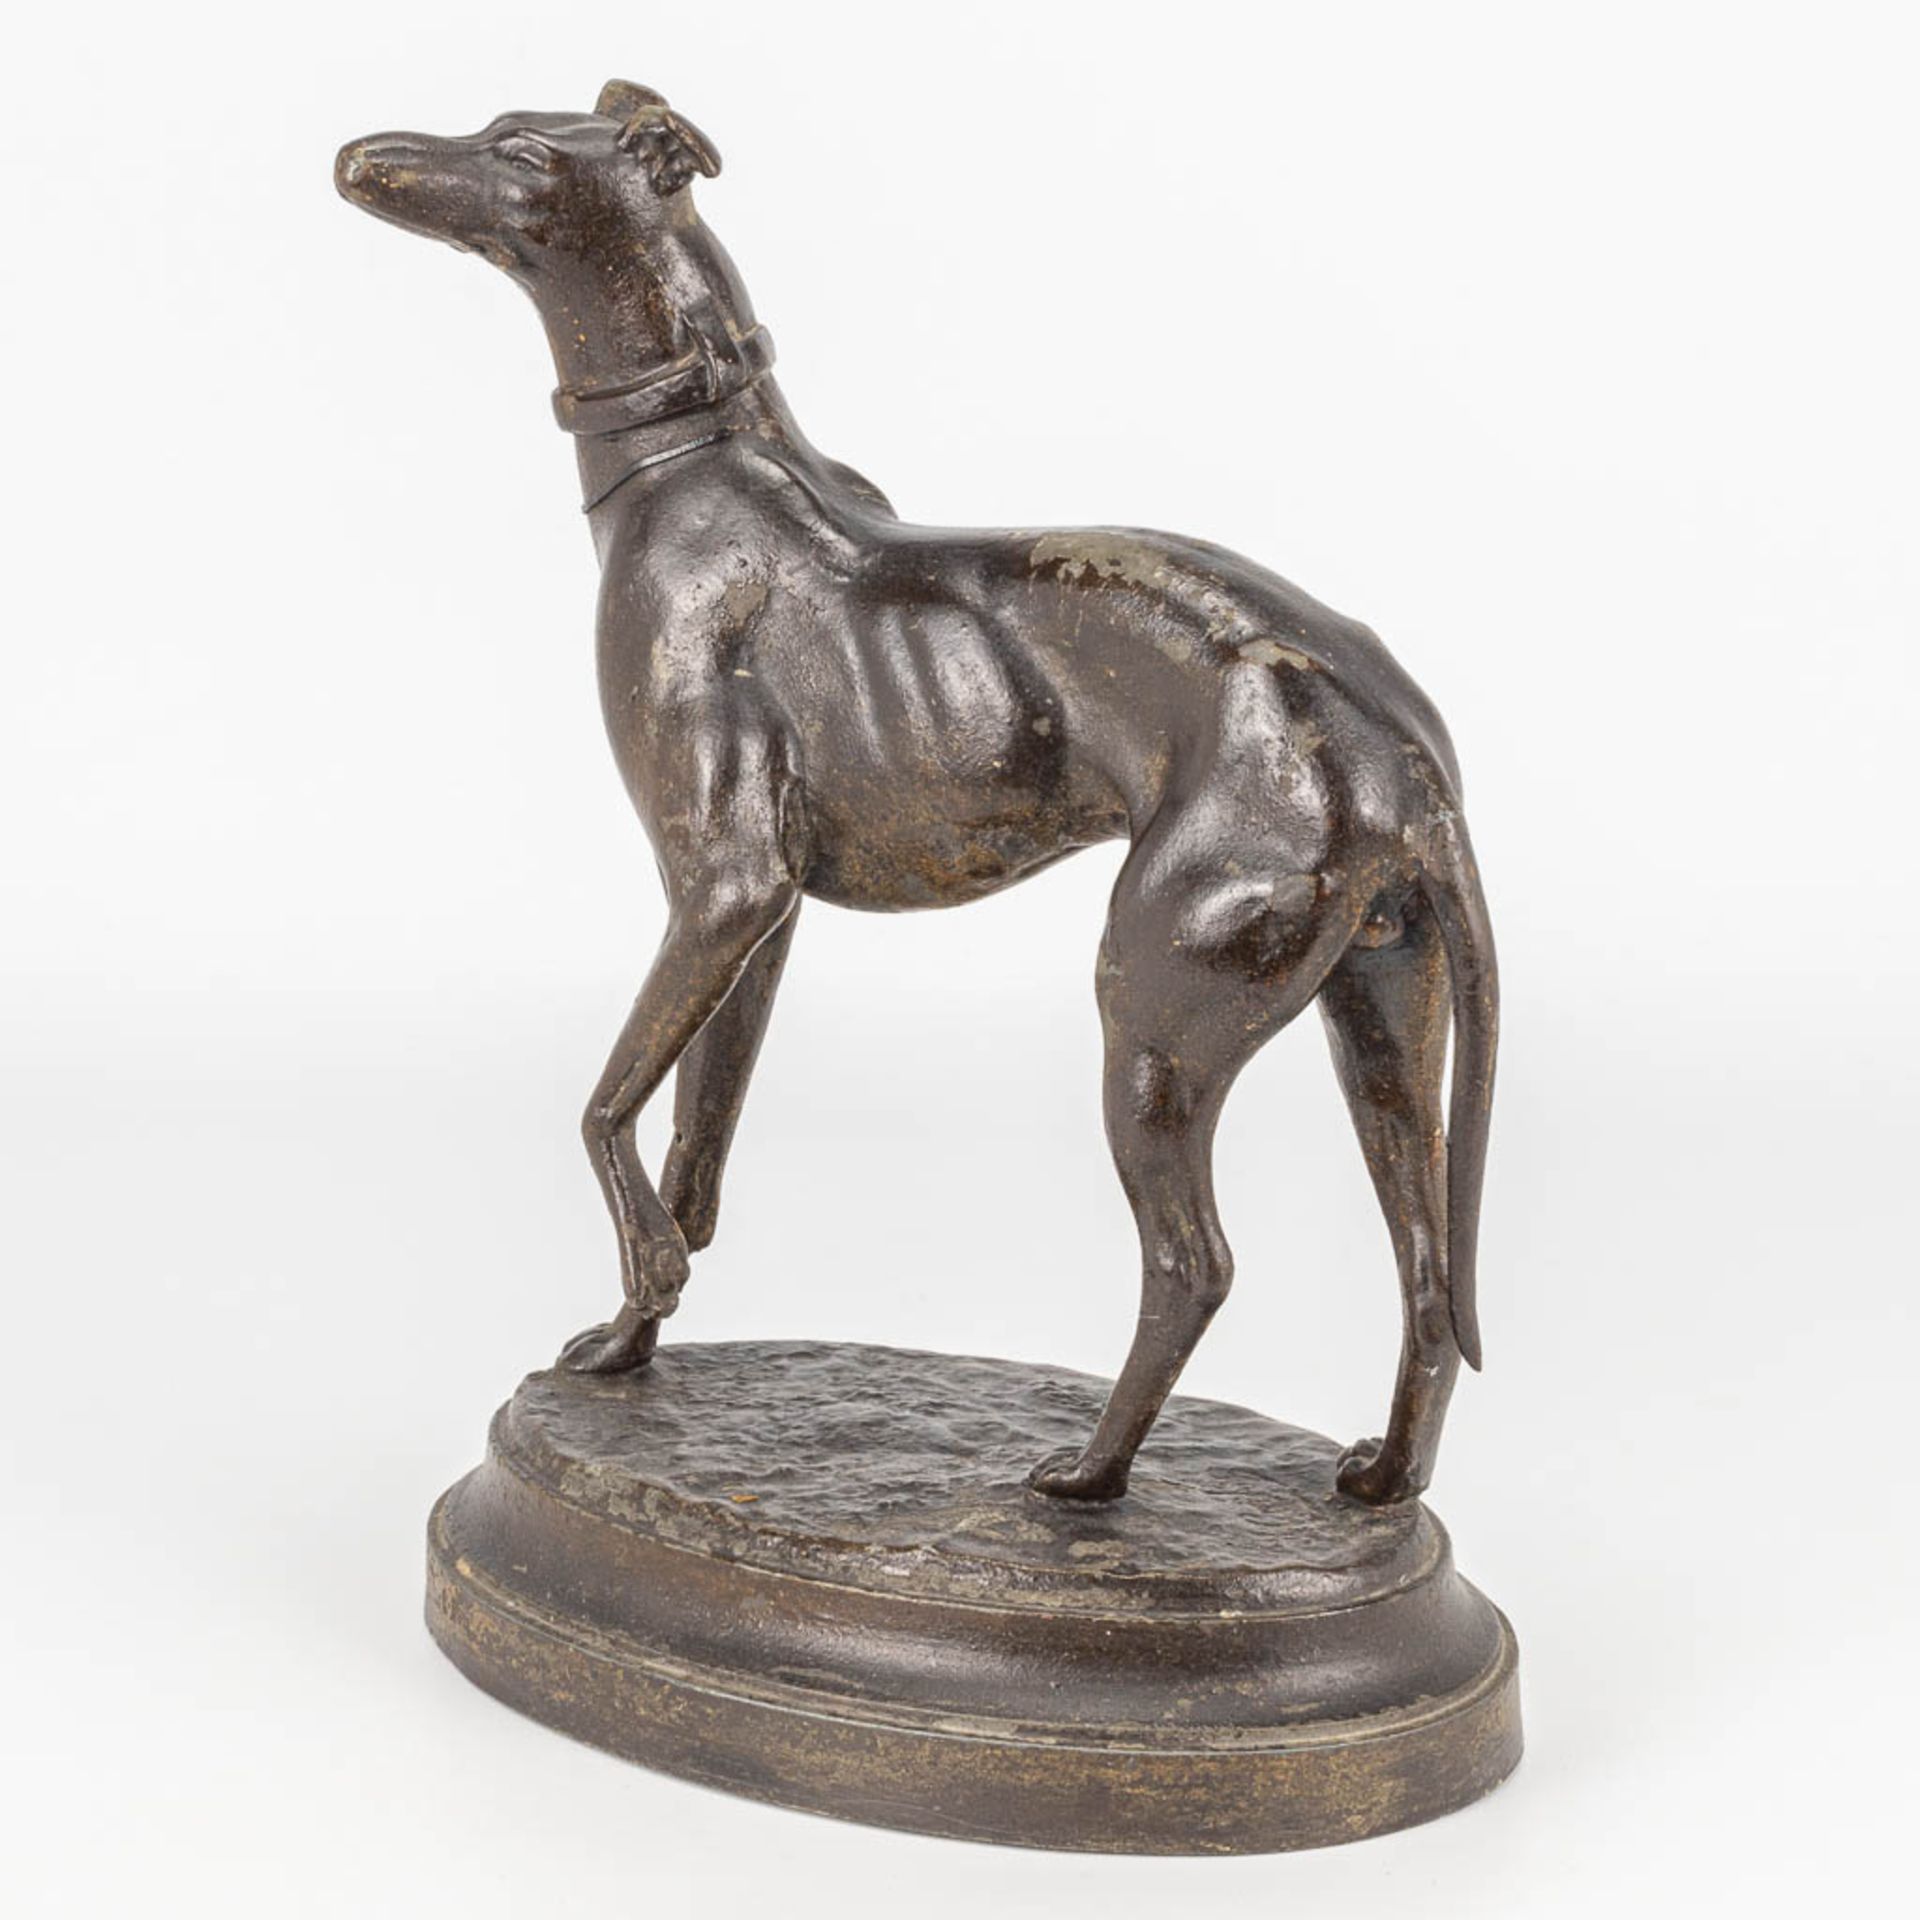 A statue of a greyhound made of spelter, Illegibly signed. - Image 5 of 12